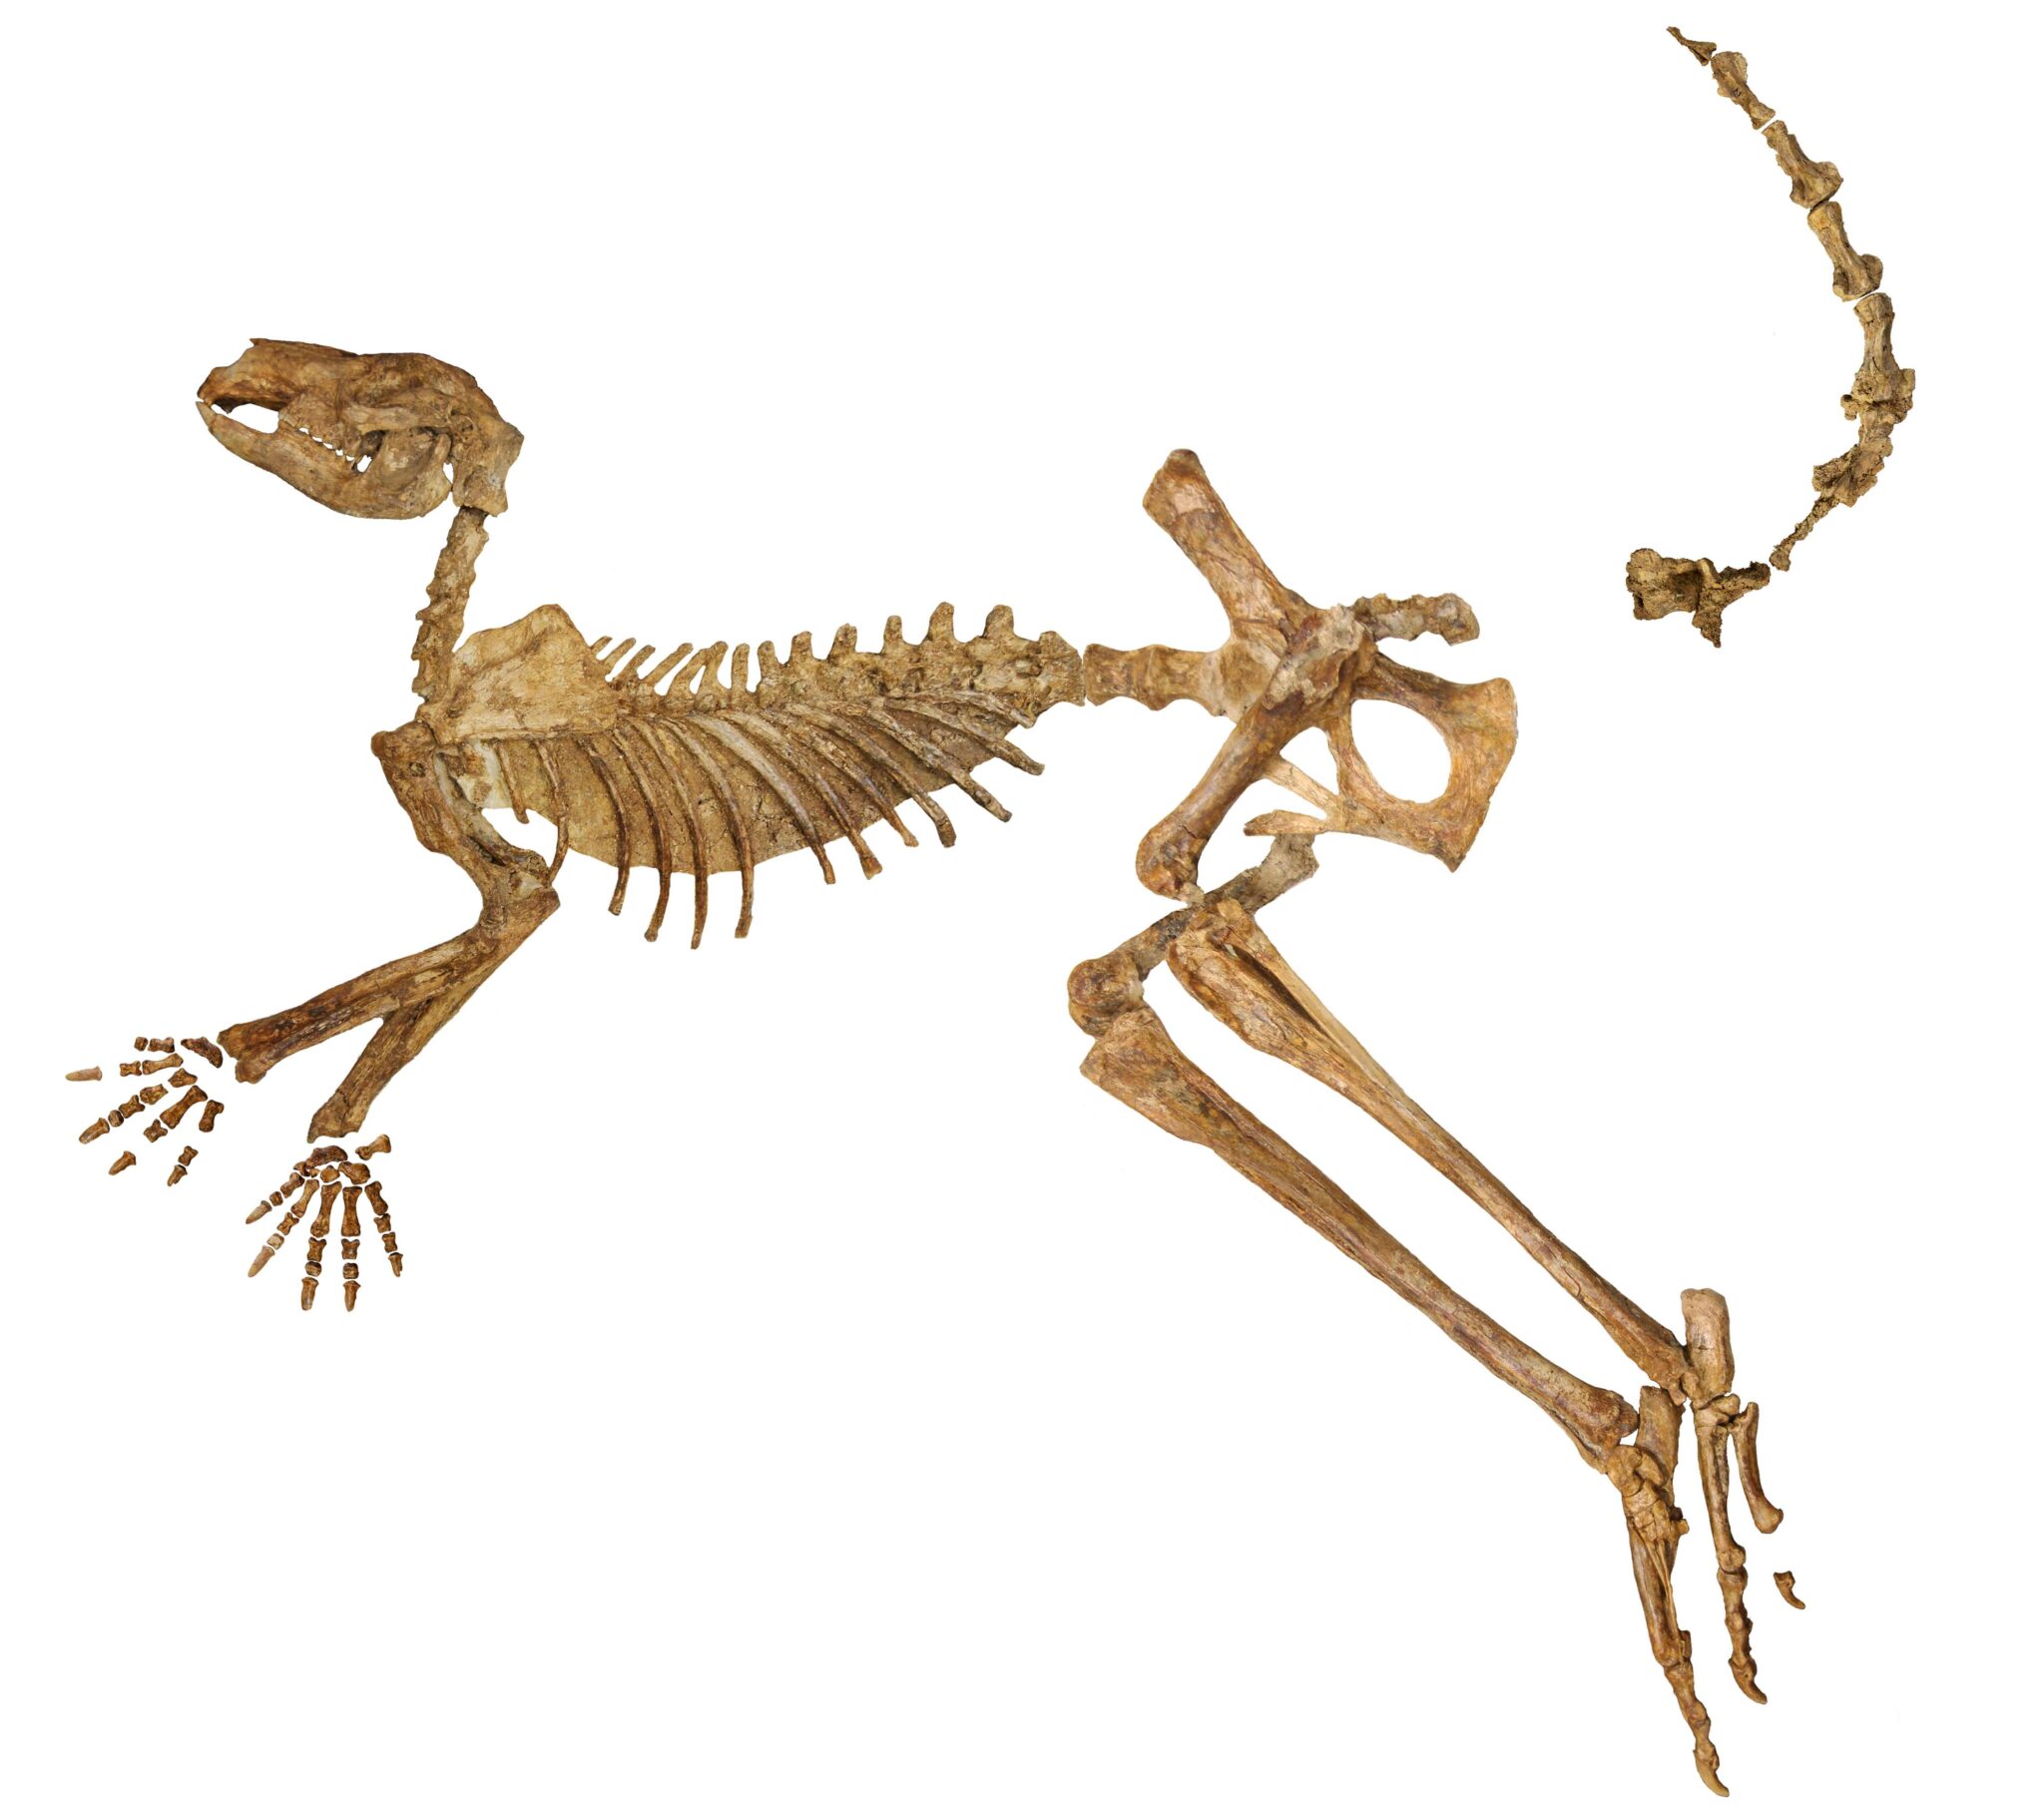 A near-complete fossil skeleton of the extinct giant kangaroo Protemnodon viator from Lake Callabonna, missing just a few bones from the hand, foot and tail.  